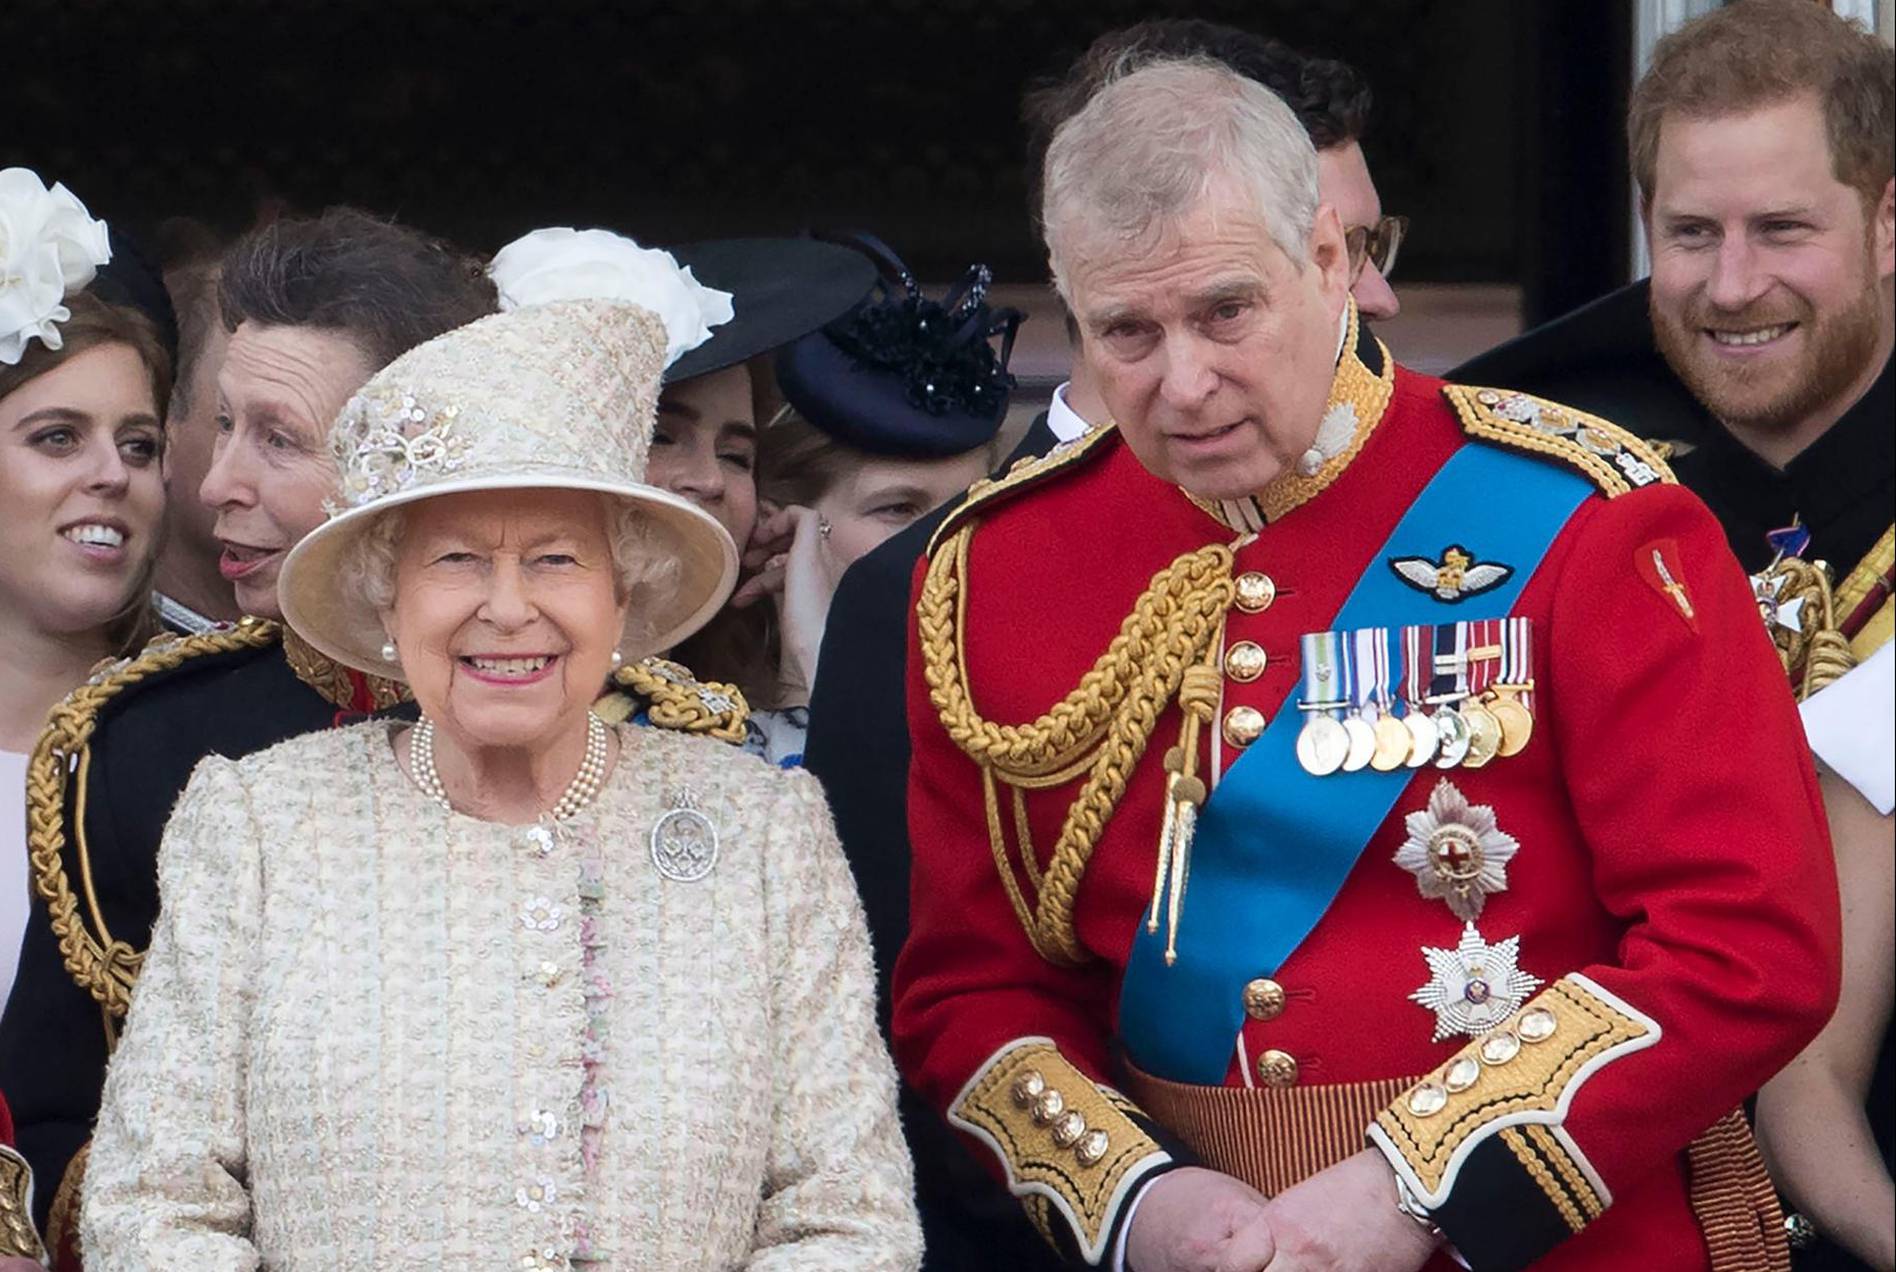 Prince Andrew stripped of military titles